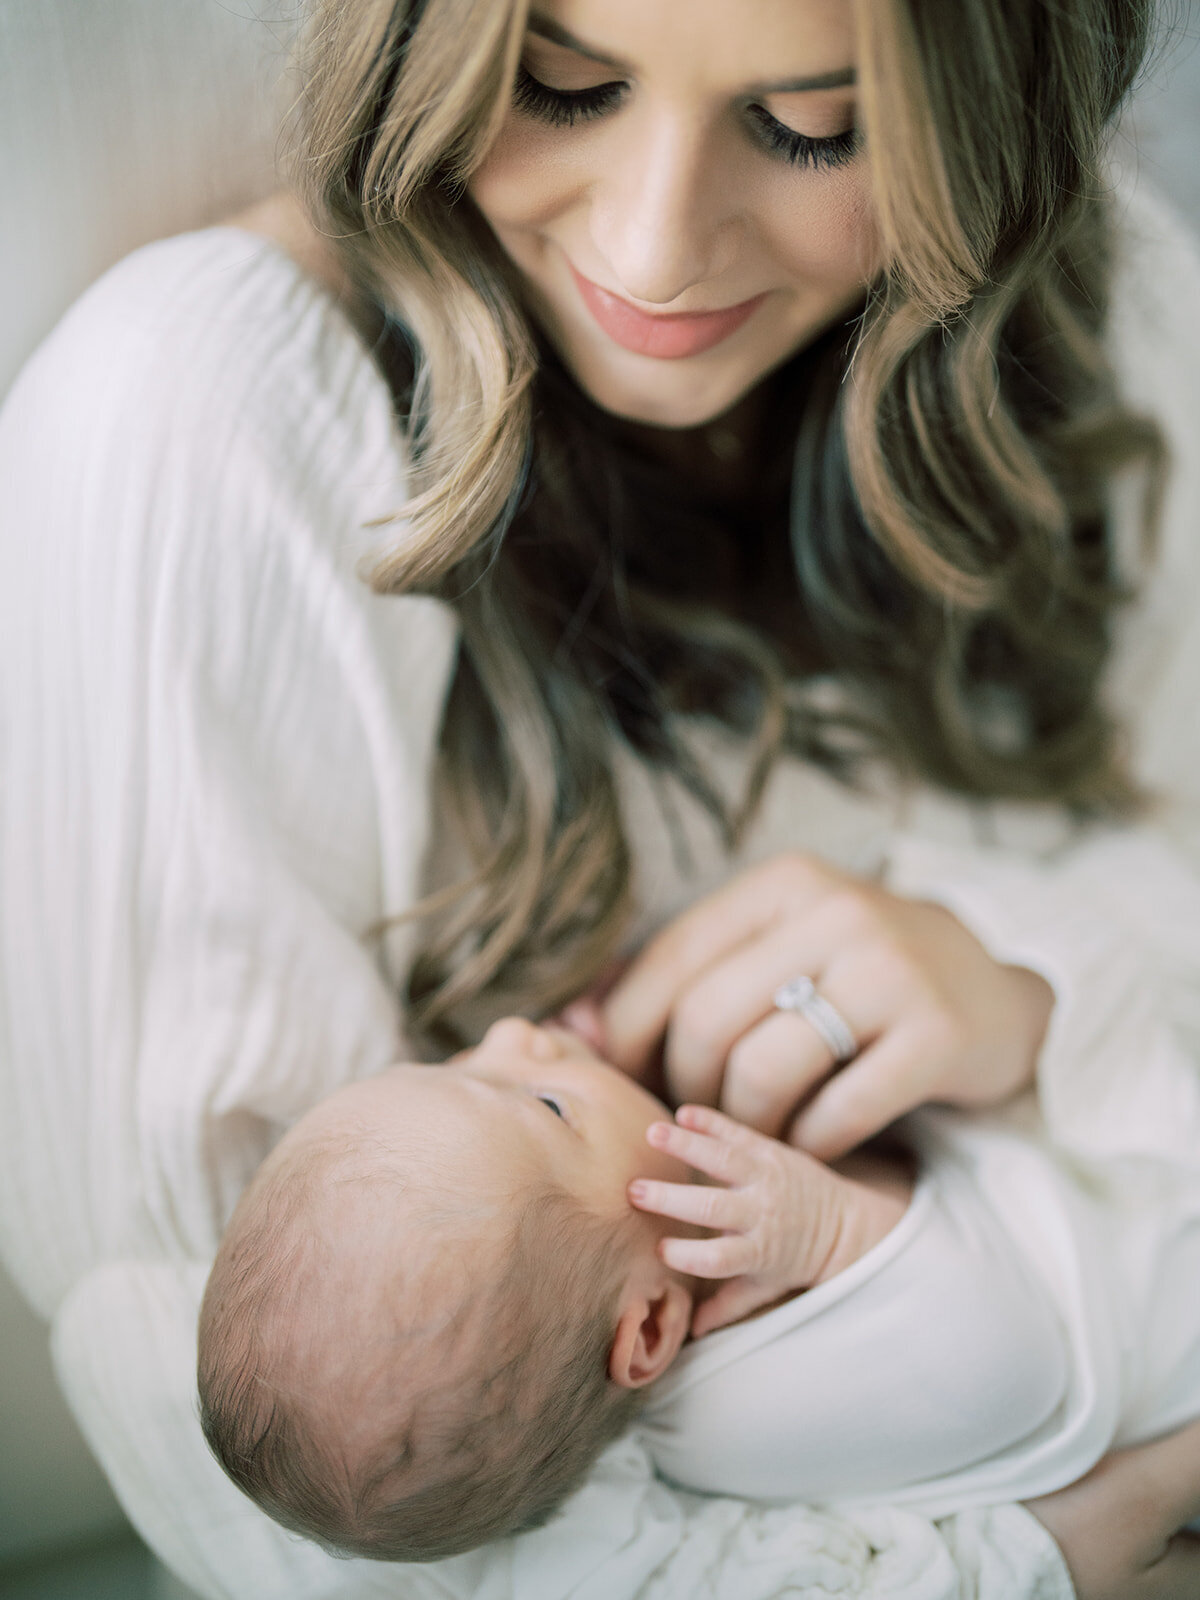 Mother with brown hair and white dress holds her newborn baby who is swaddled in white and smiles down at her.